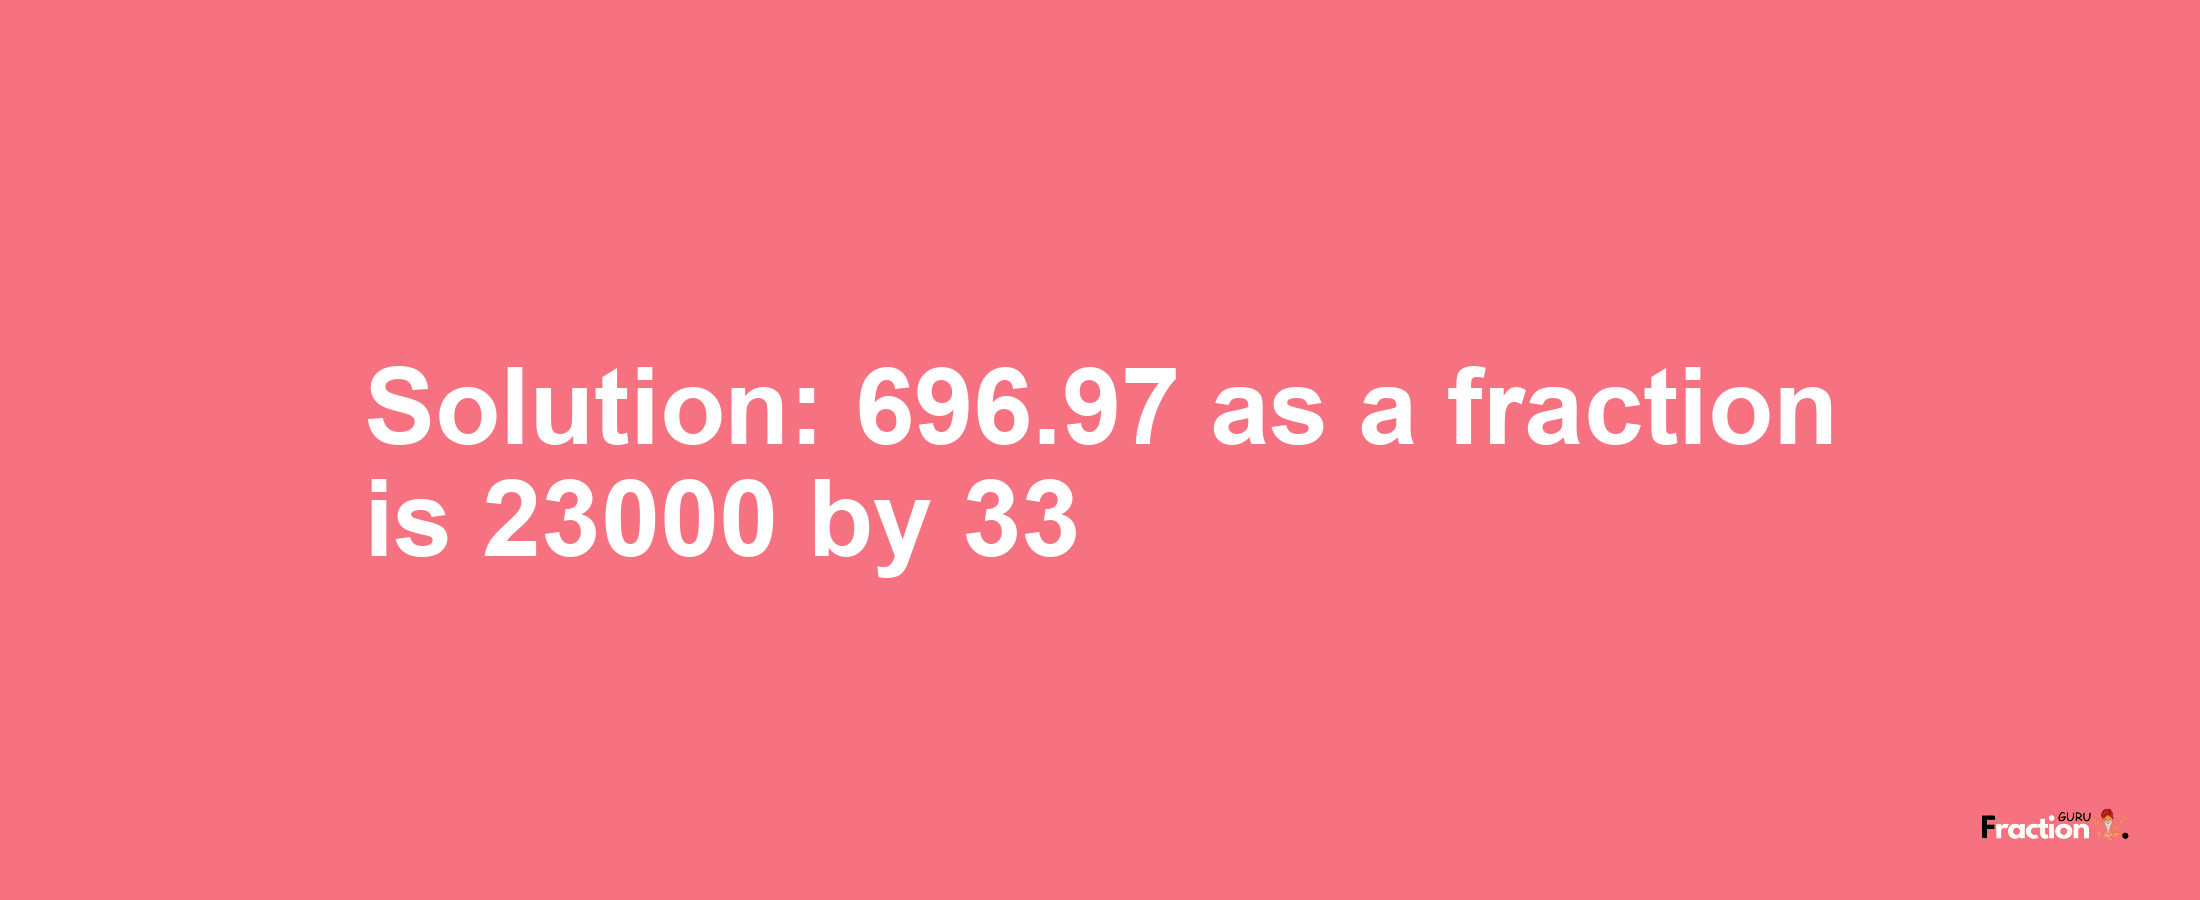 Solution:696.97 as a fraction is 23000/33